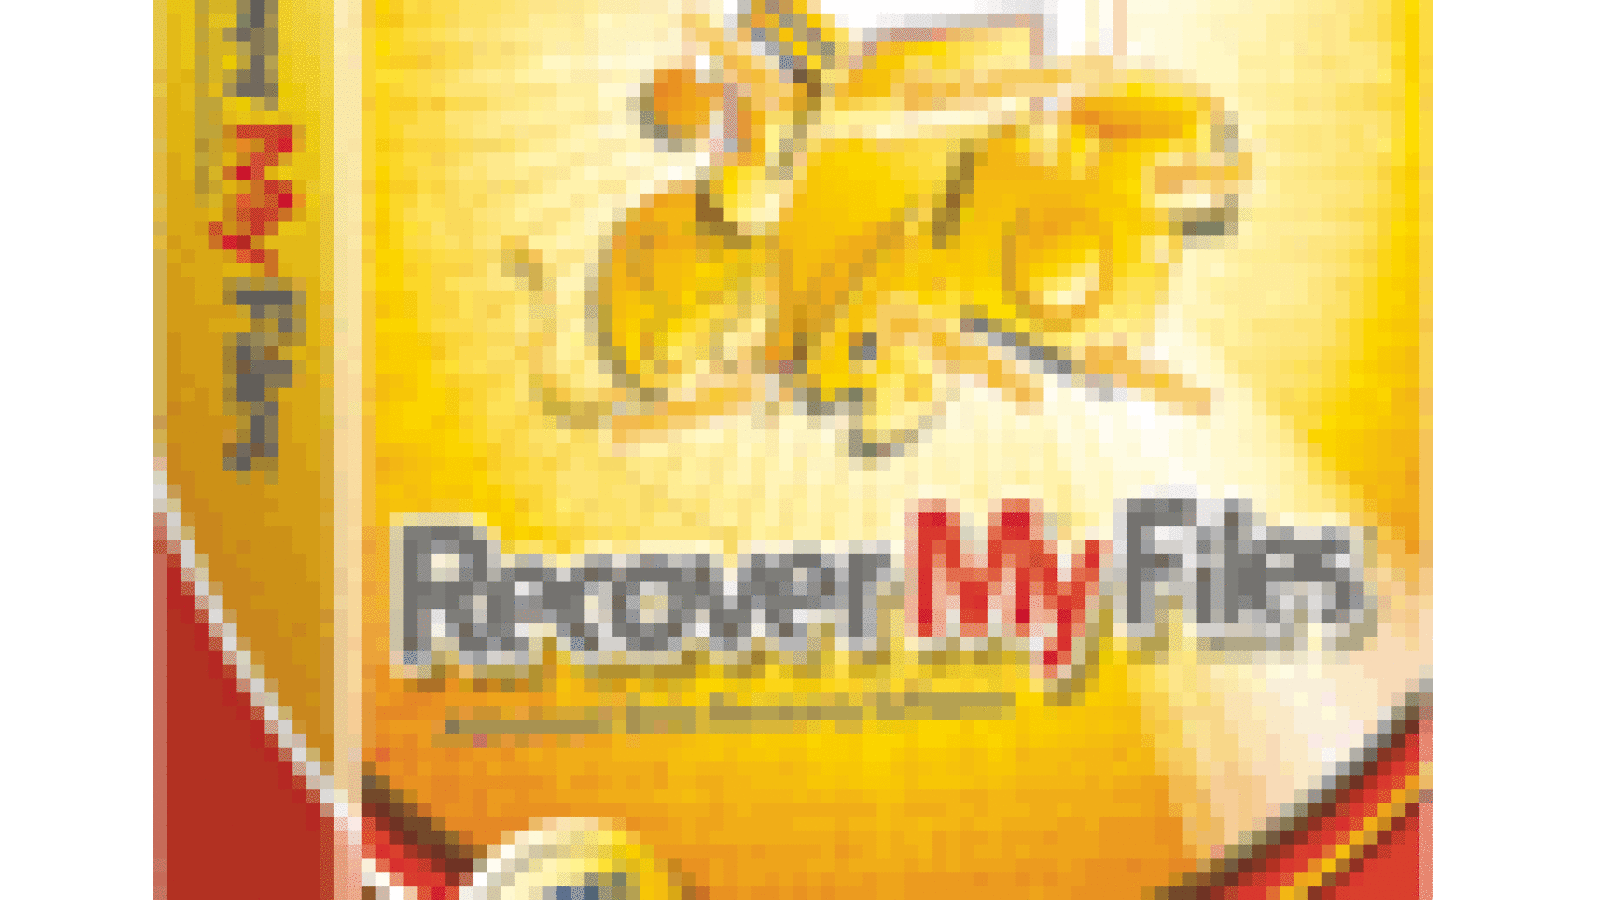 recover my files v3 7.3 3067